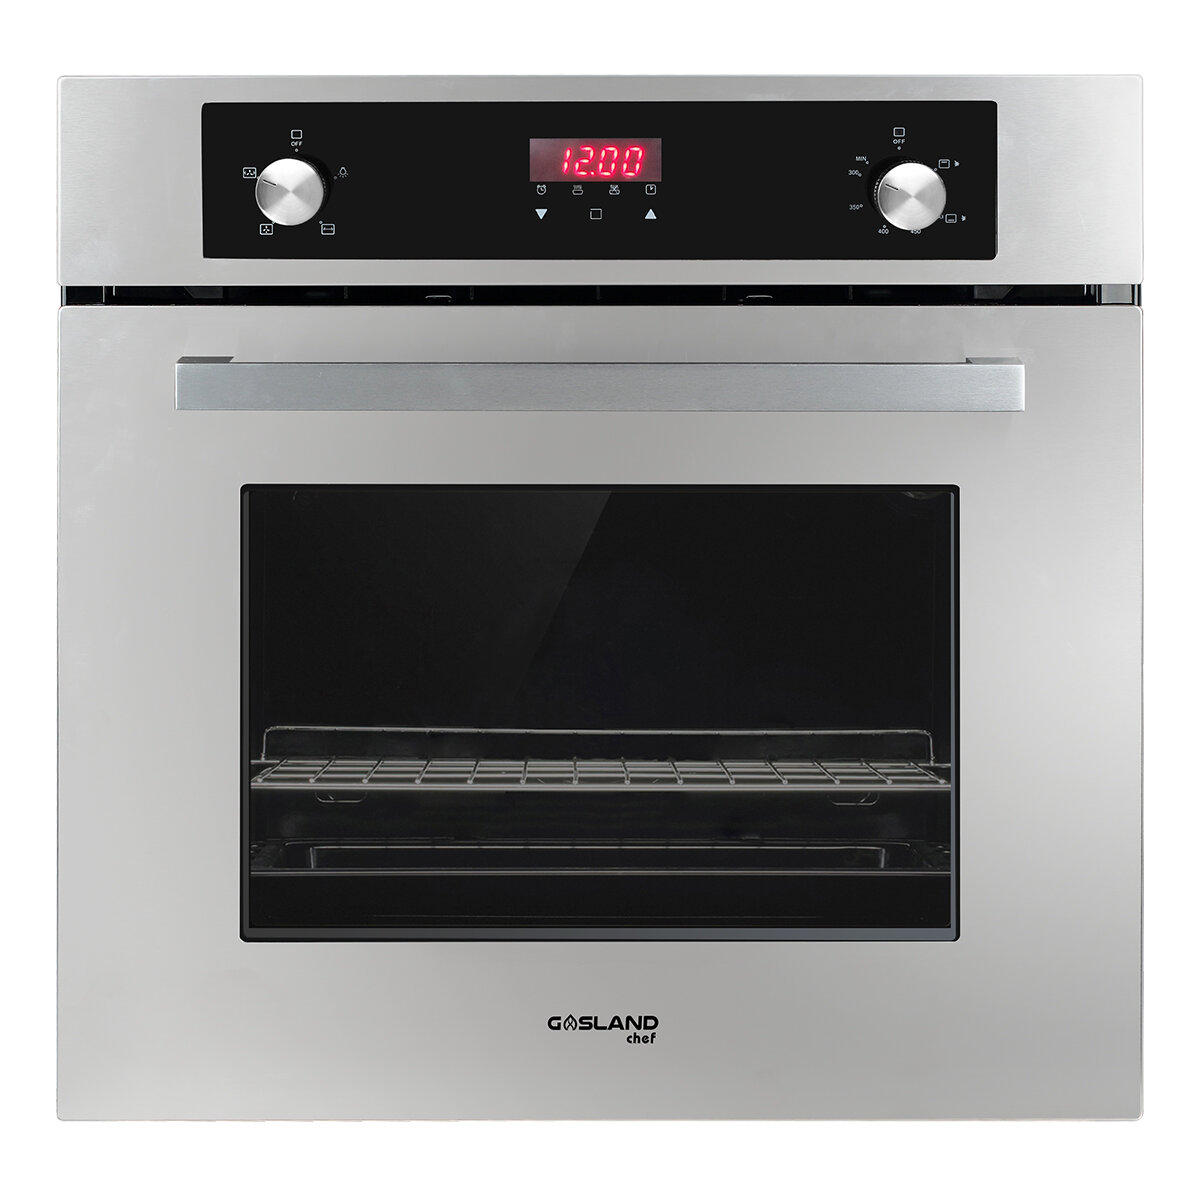 Empava 24 in. Single GAS Wall Oven with Convection in Stainless Steel, Stainless Steel-08